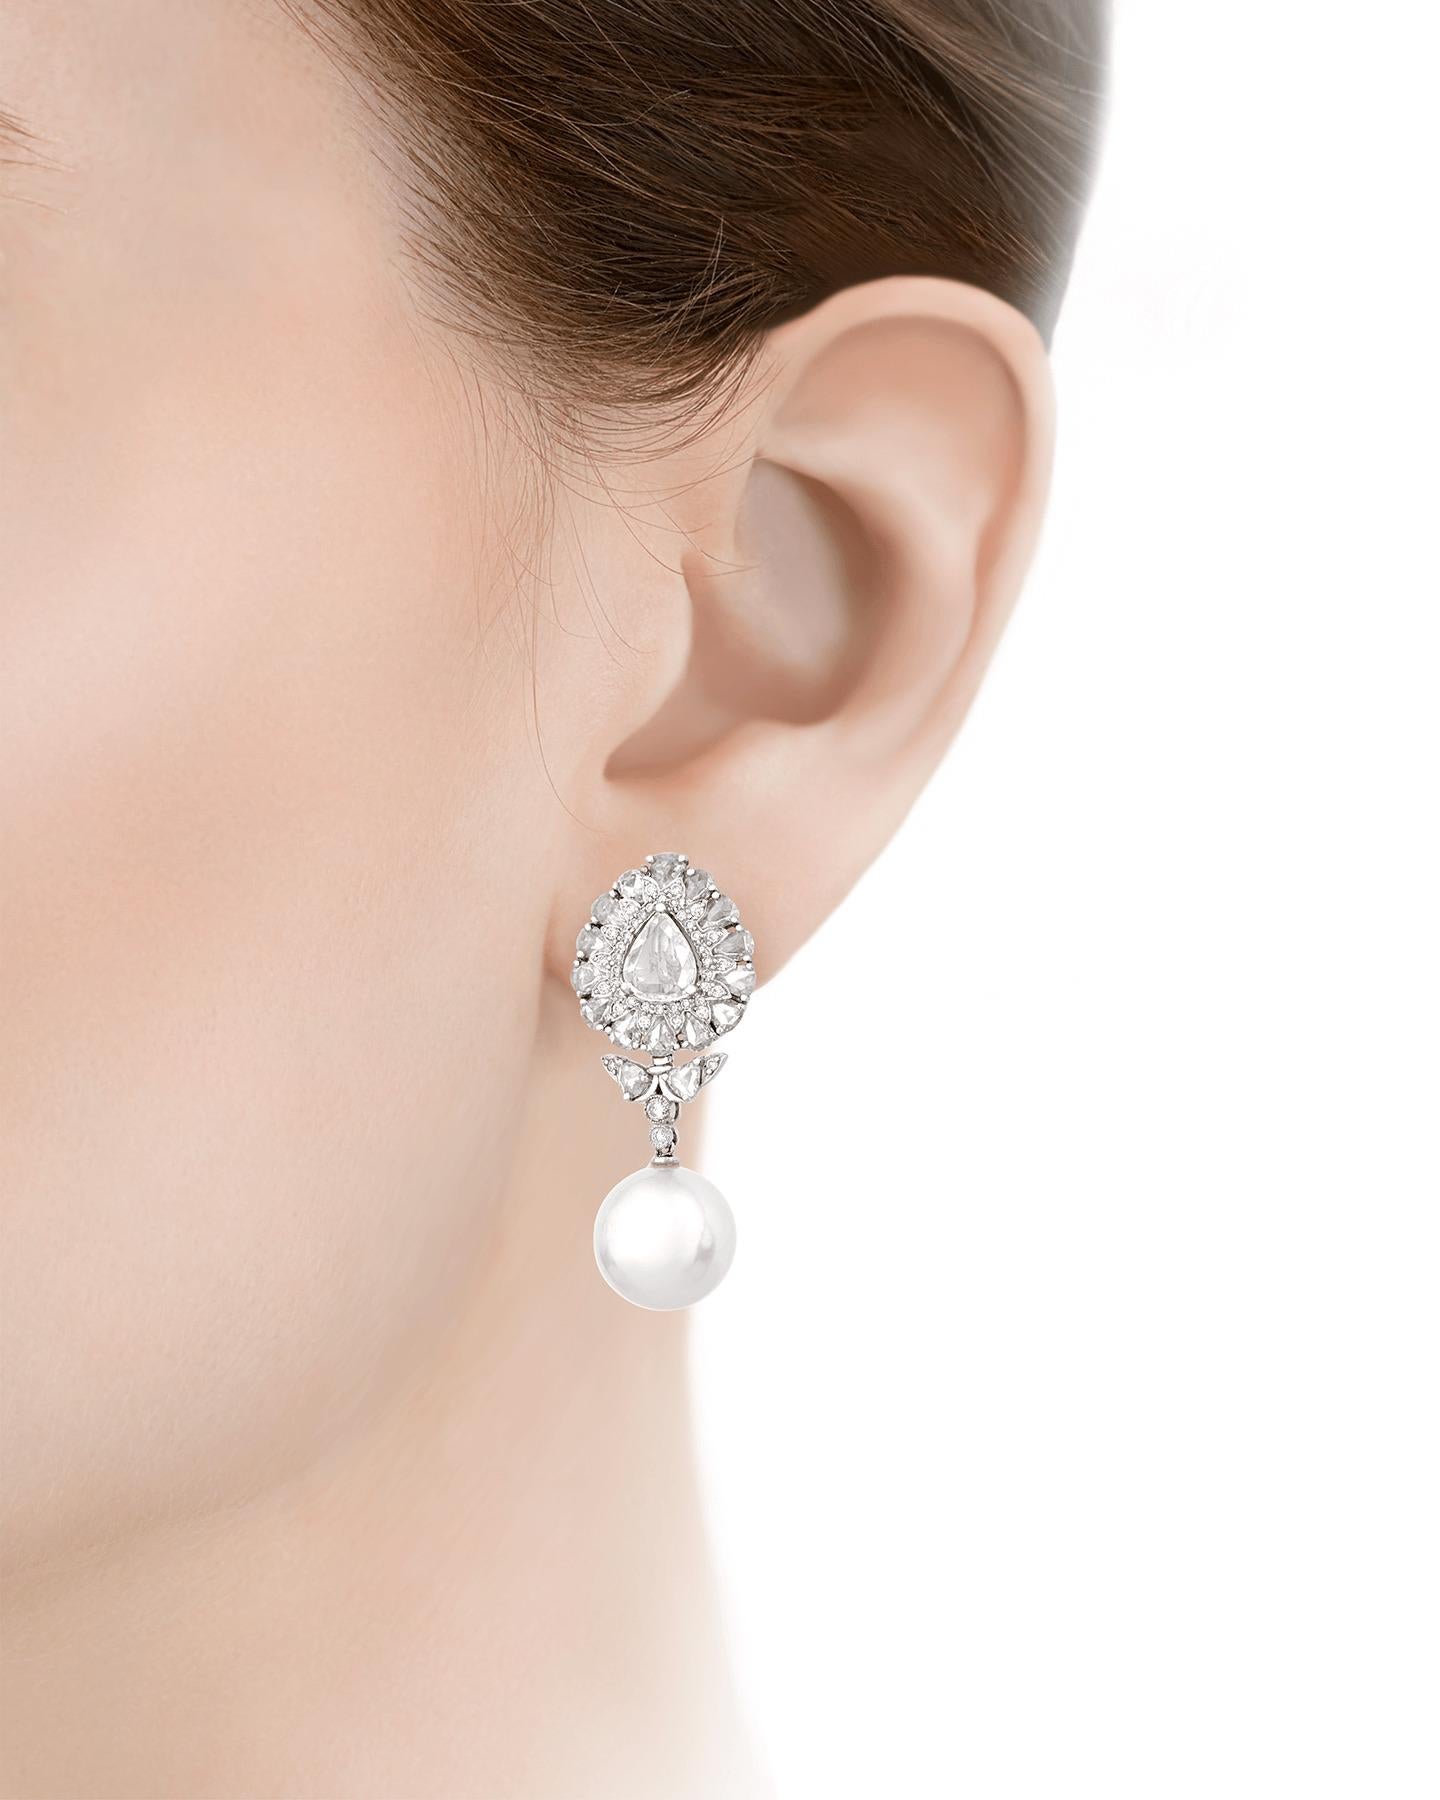 Rose-cut diamonds and lustrous white South Sea pearls are perfectly paired in these dazzling dangle earrings. Measuring 13mm, the pearls display the exceptional luminescence for which South Sea pearls are renowned, while the 3.68 total carats of